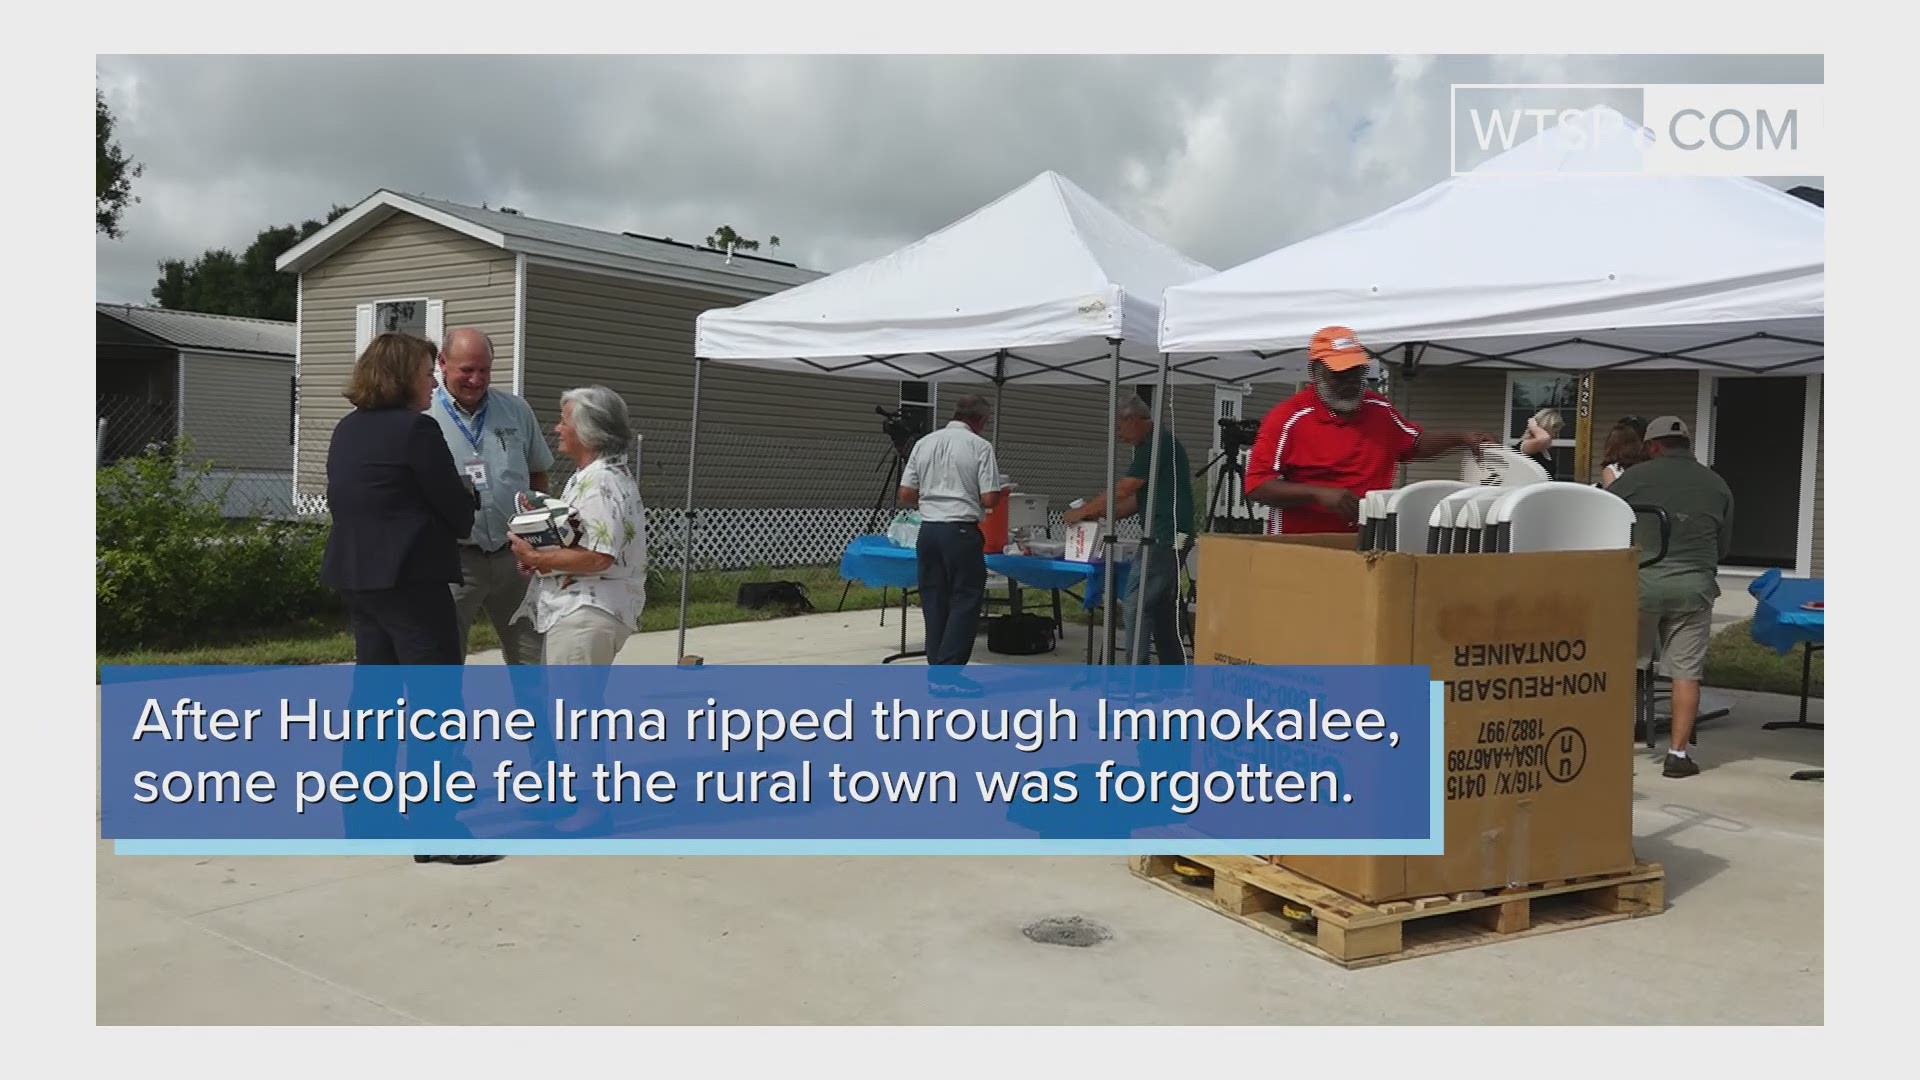 Depending who you ask, Immokalee was forgotten after Hurricane Irma. Frank Rincon says the Category 5 storm was the best thing that could have happened to the rural town.  https://on.wtsp.com/2WCvPQU